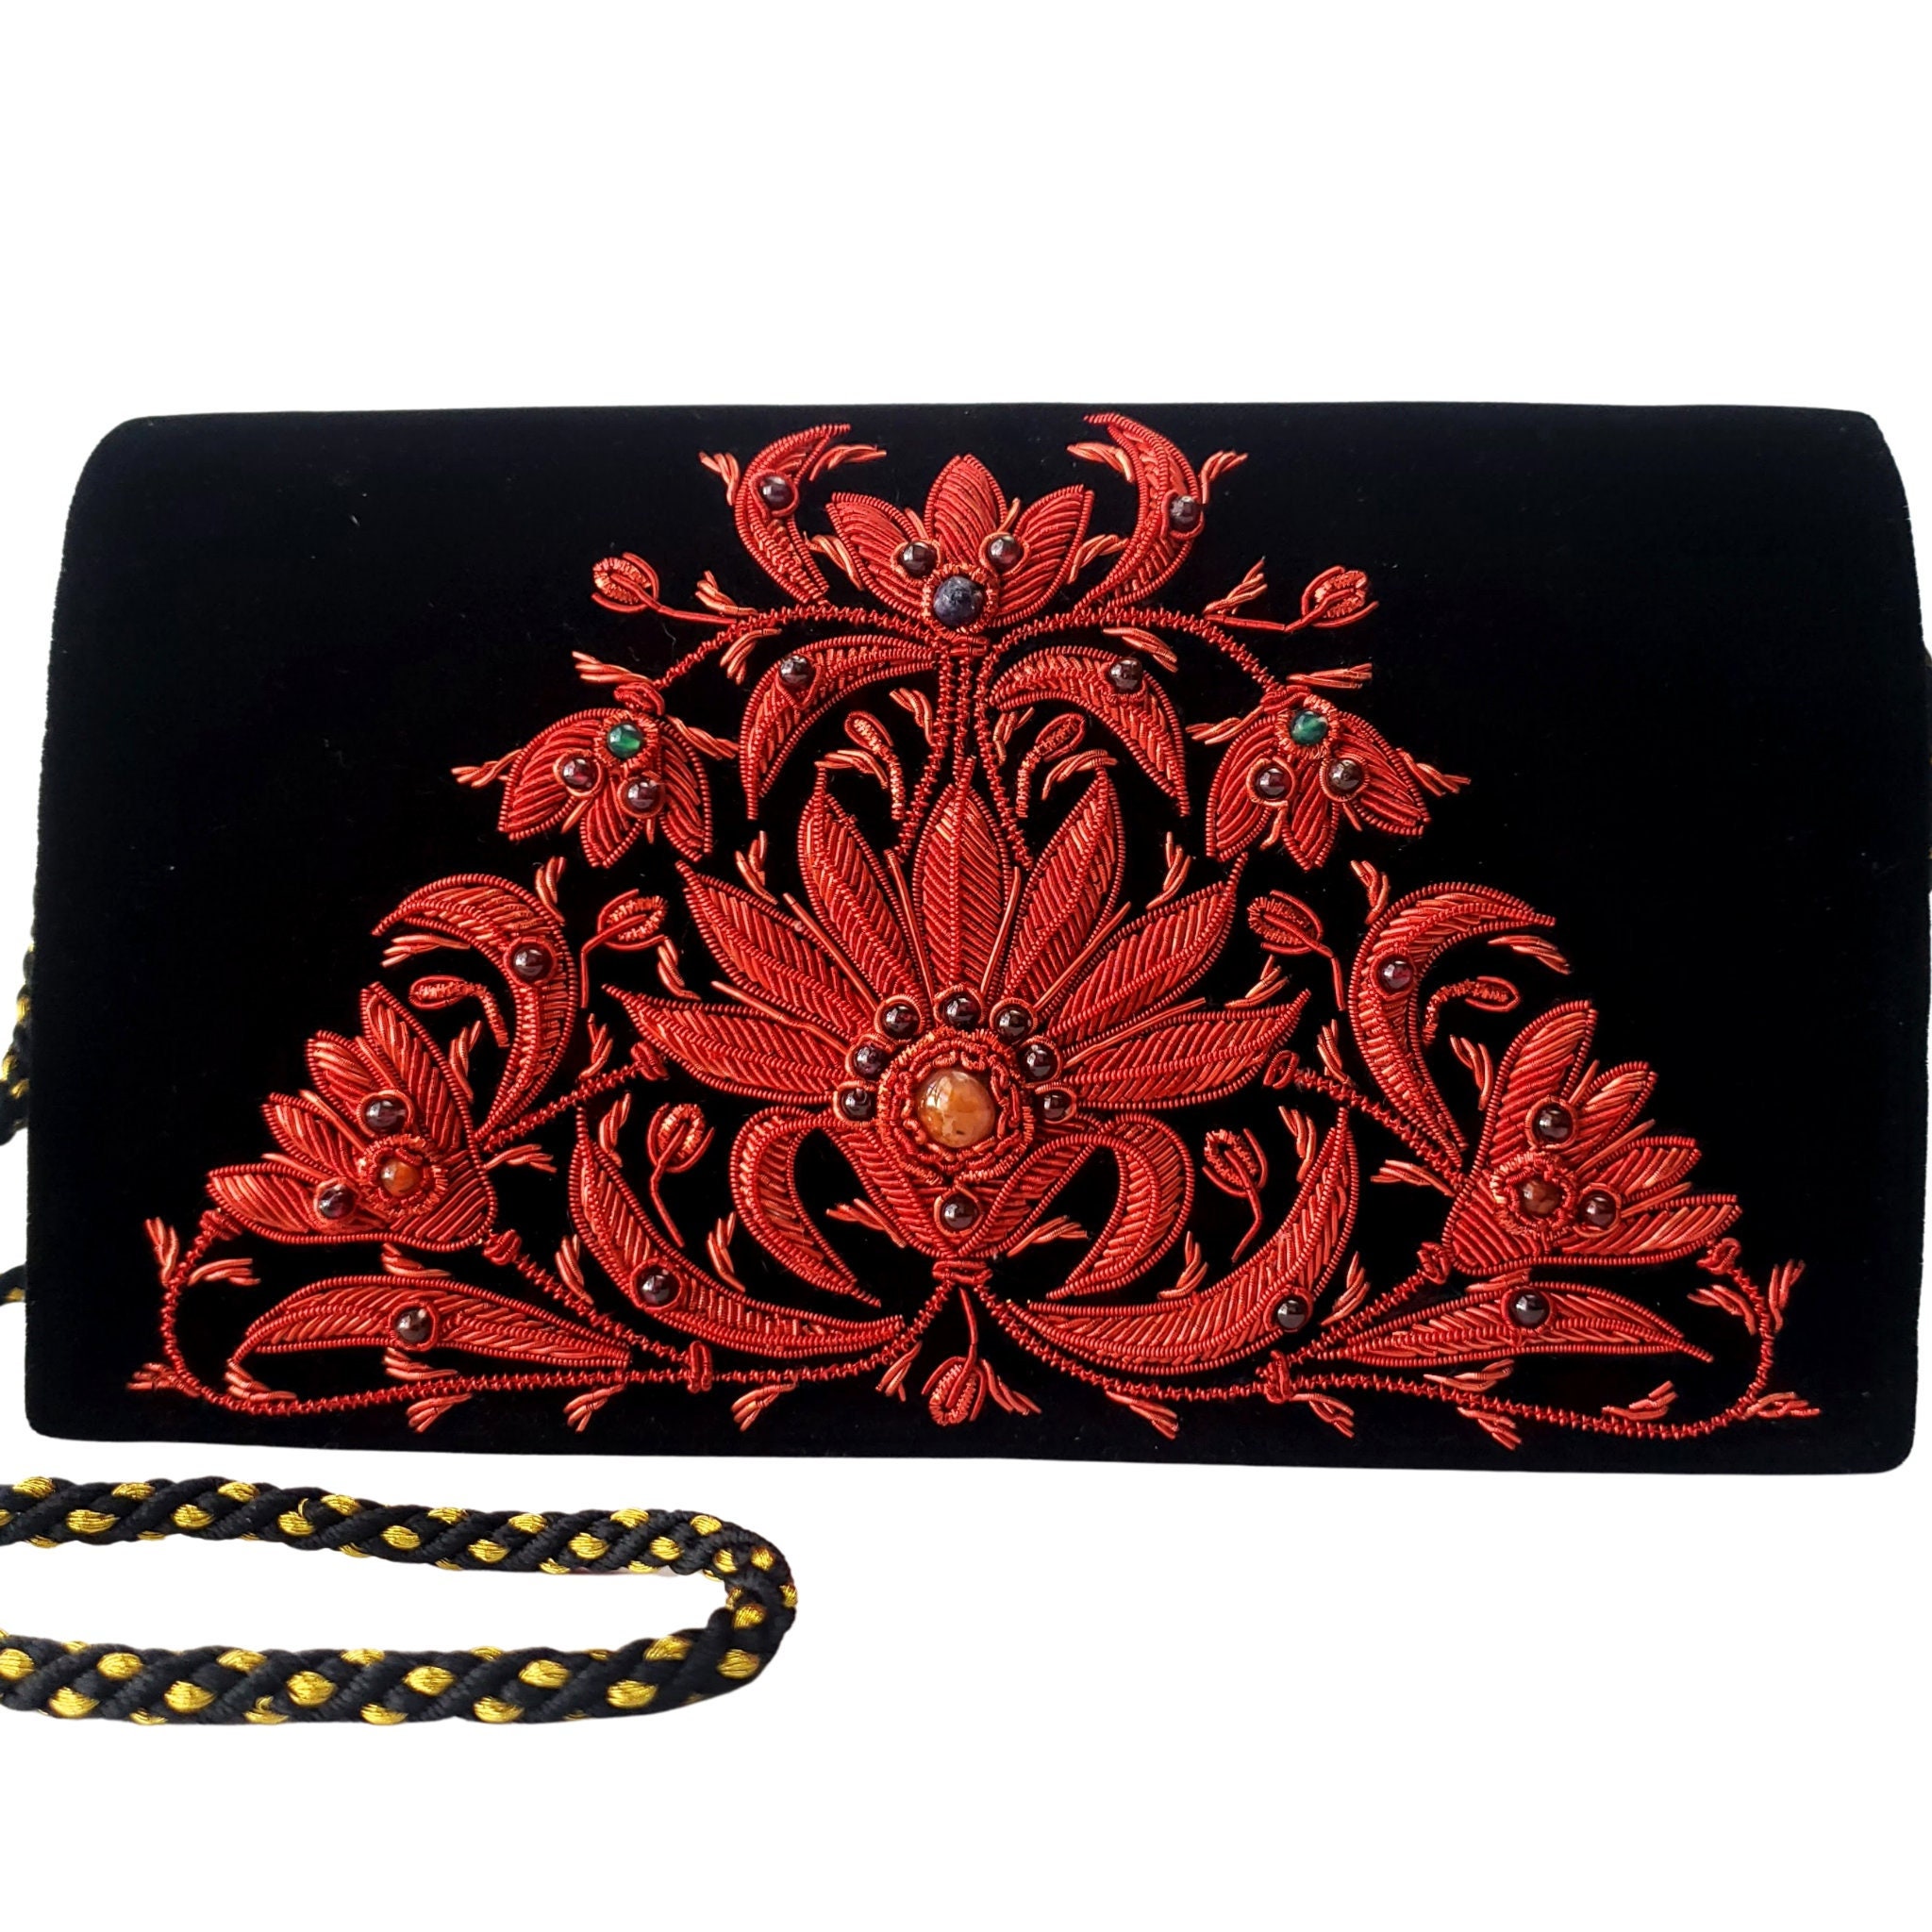 Luxury red and black floral evening bag, embroidered OOAK statement clutch,  gemstone purse, India purse